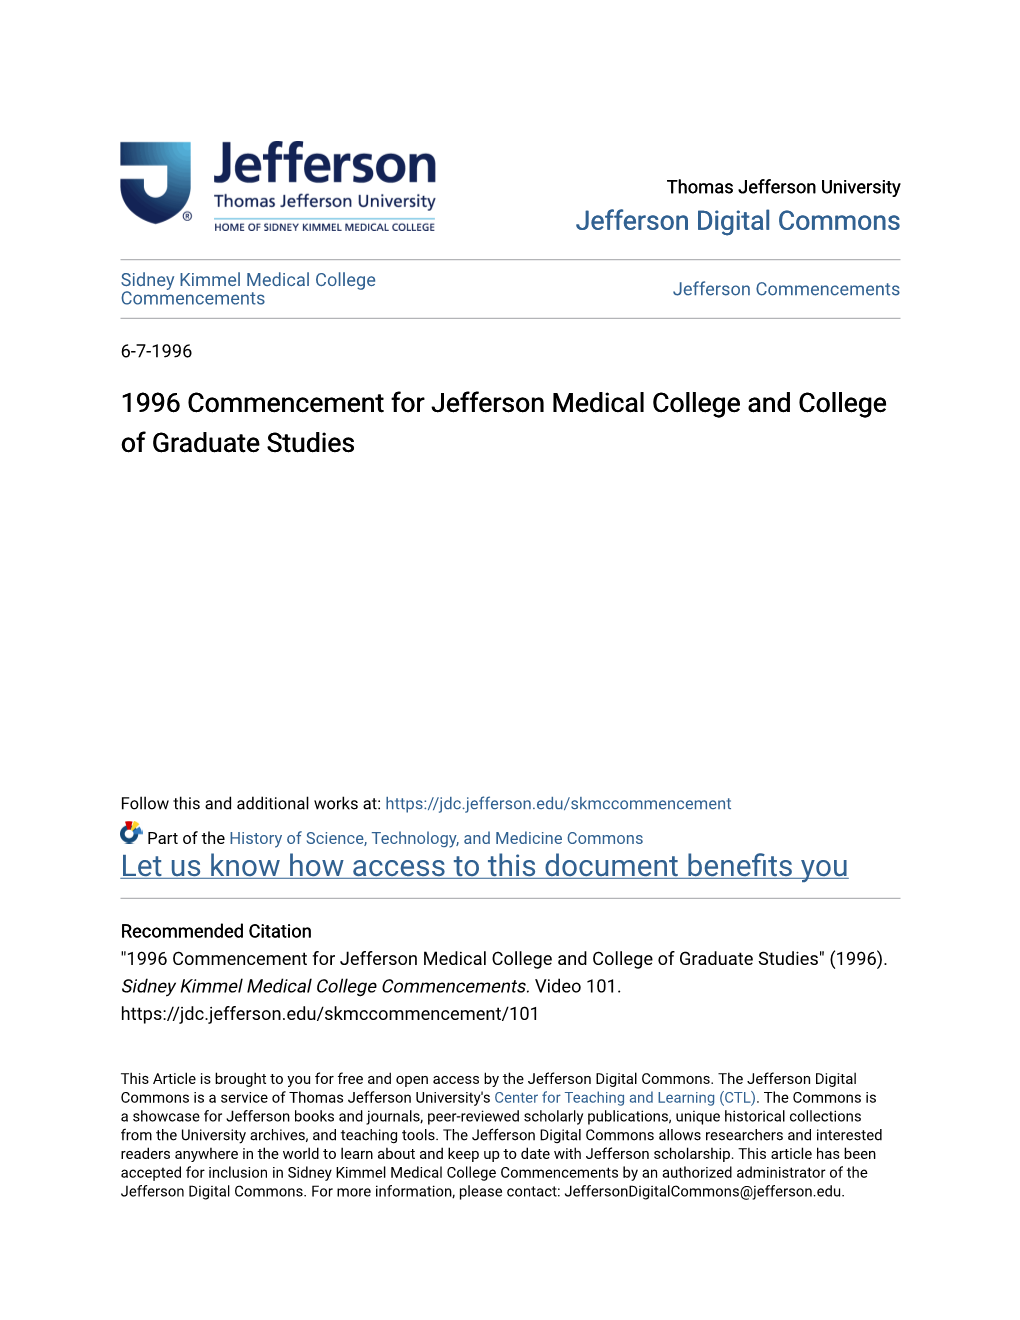 1996 Commencement for Jefferson Medical College and College of Graduate Studies